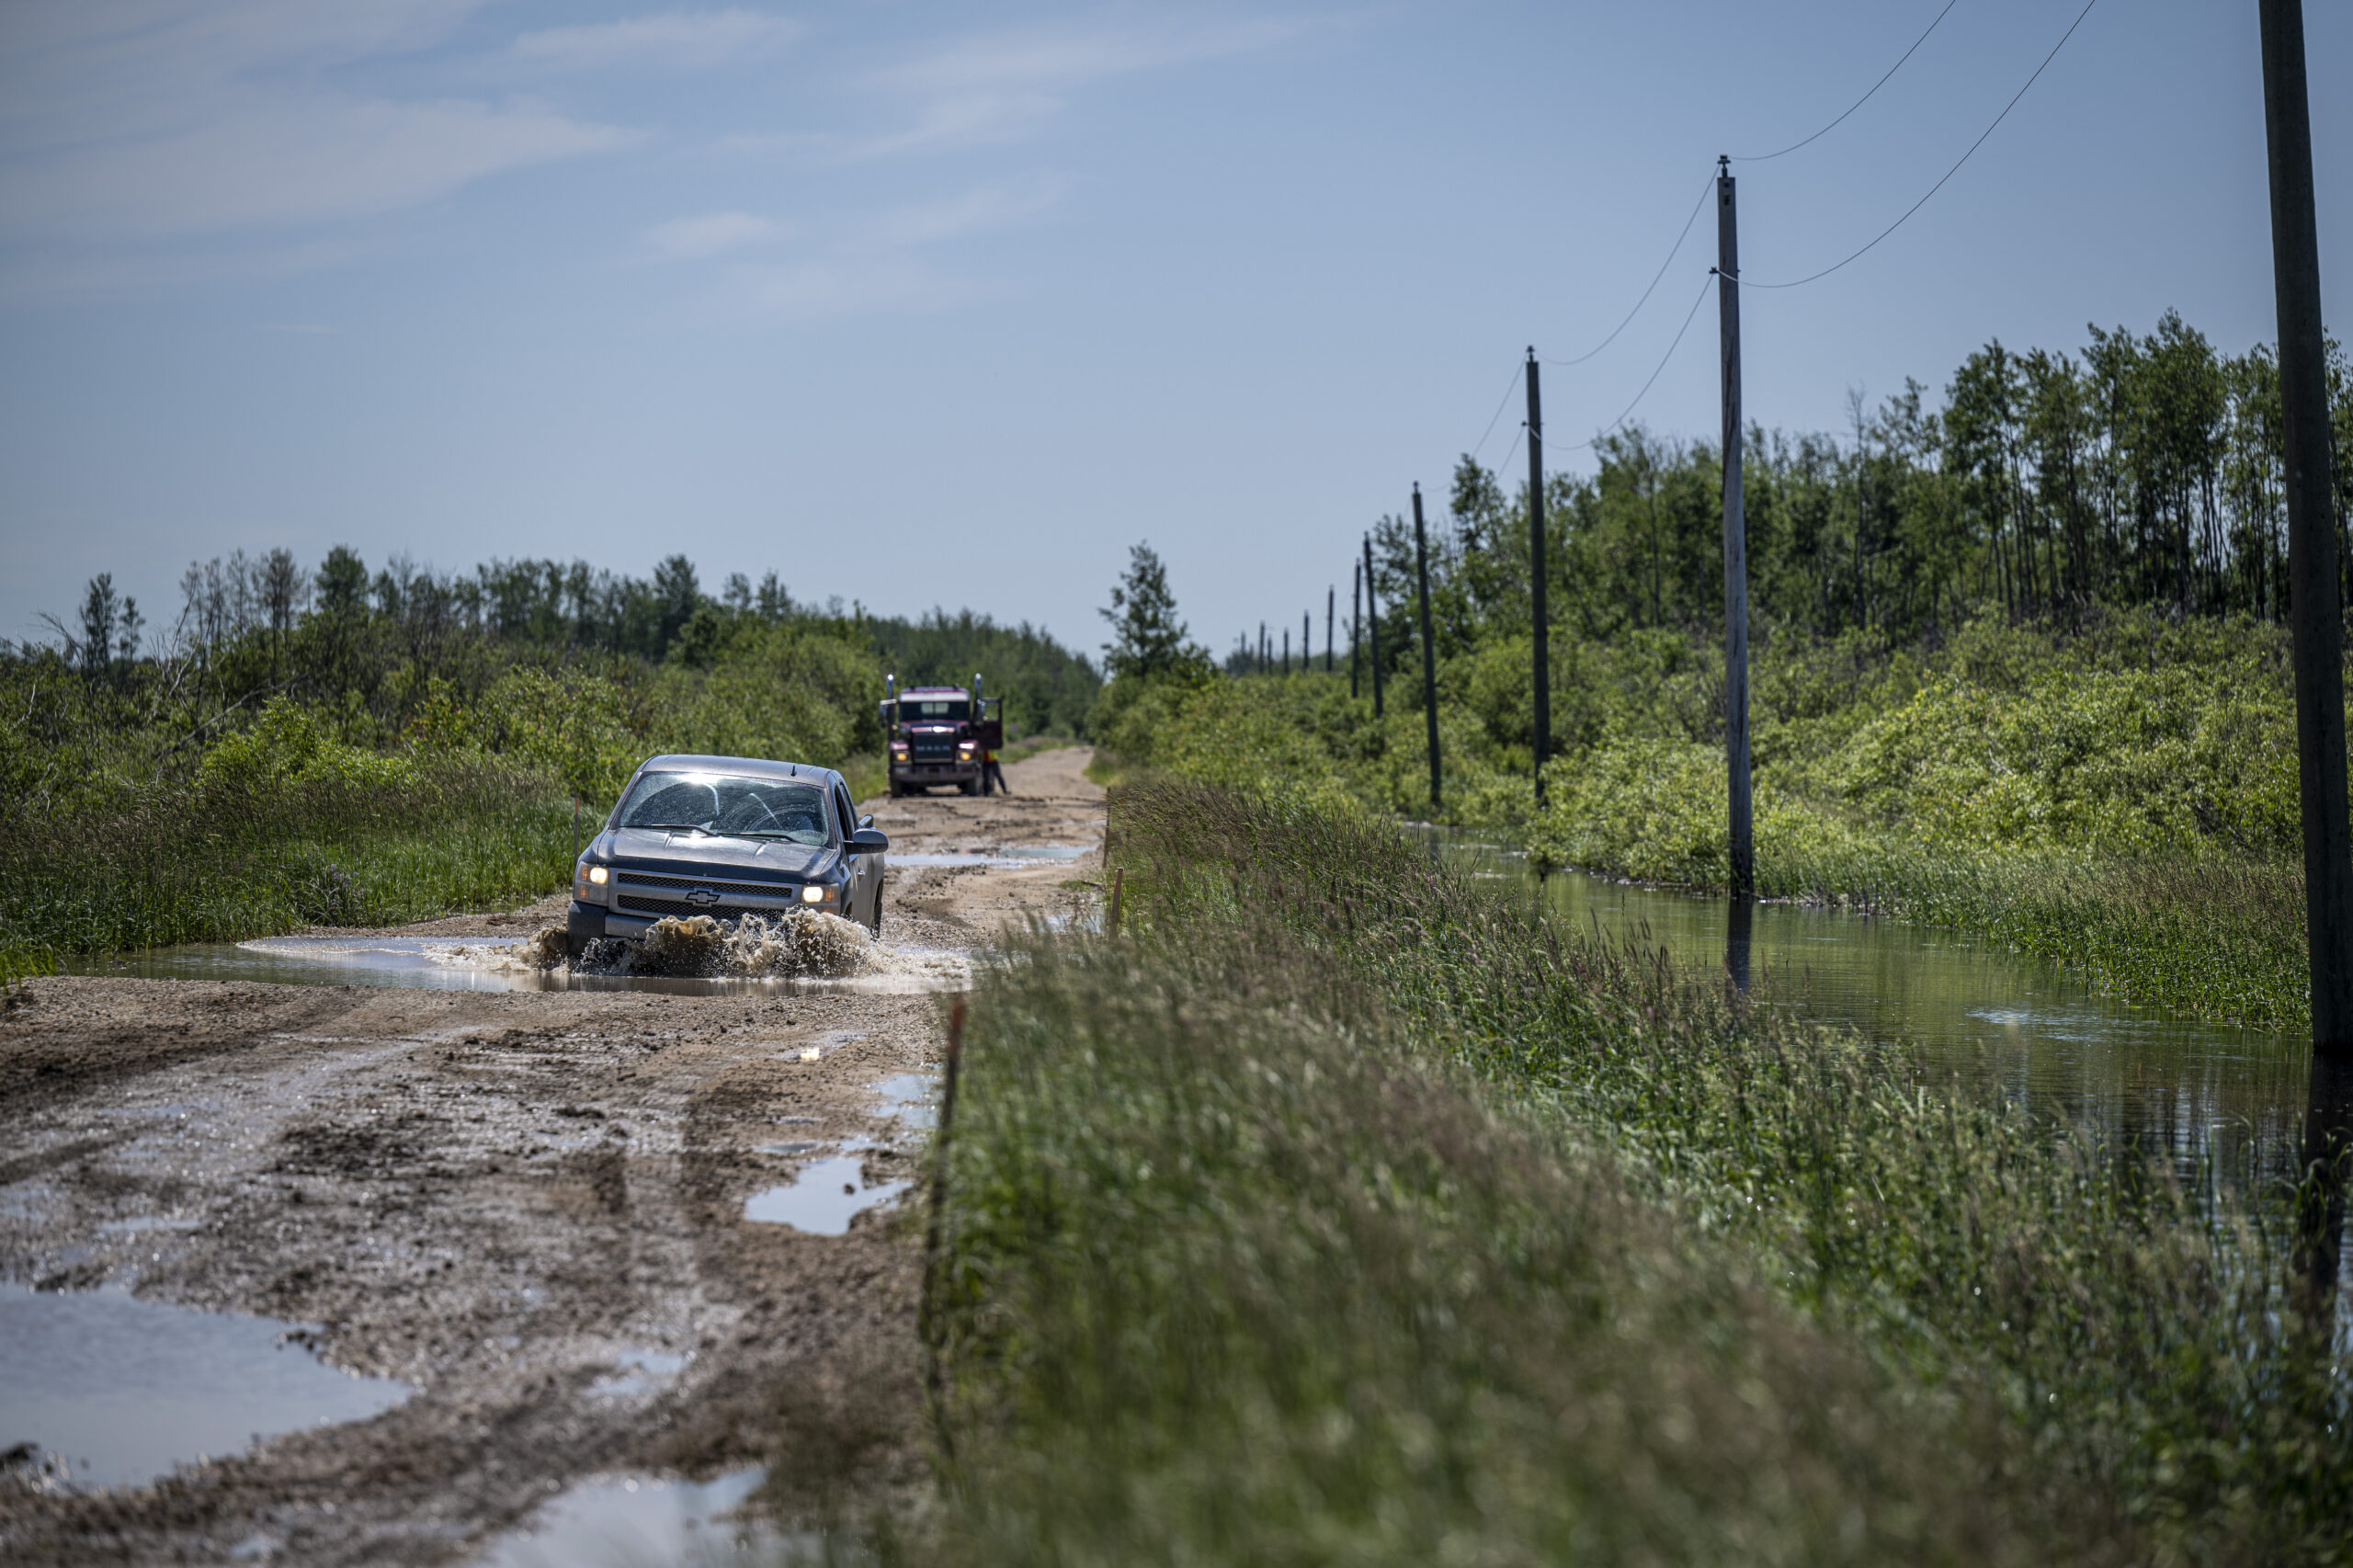 A black truck drives through a deep puddle on a gravel road